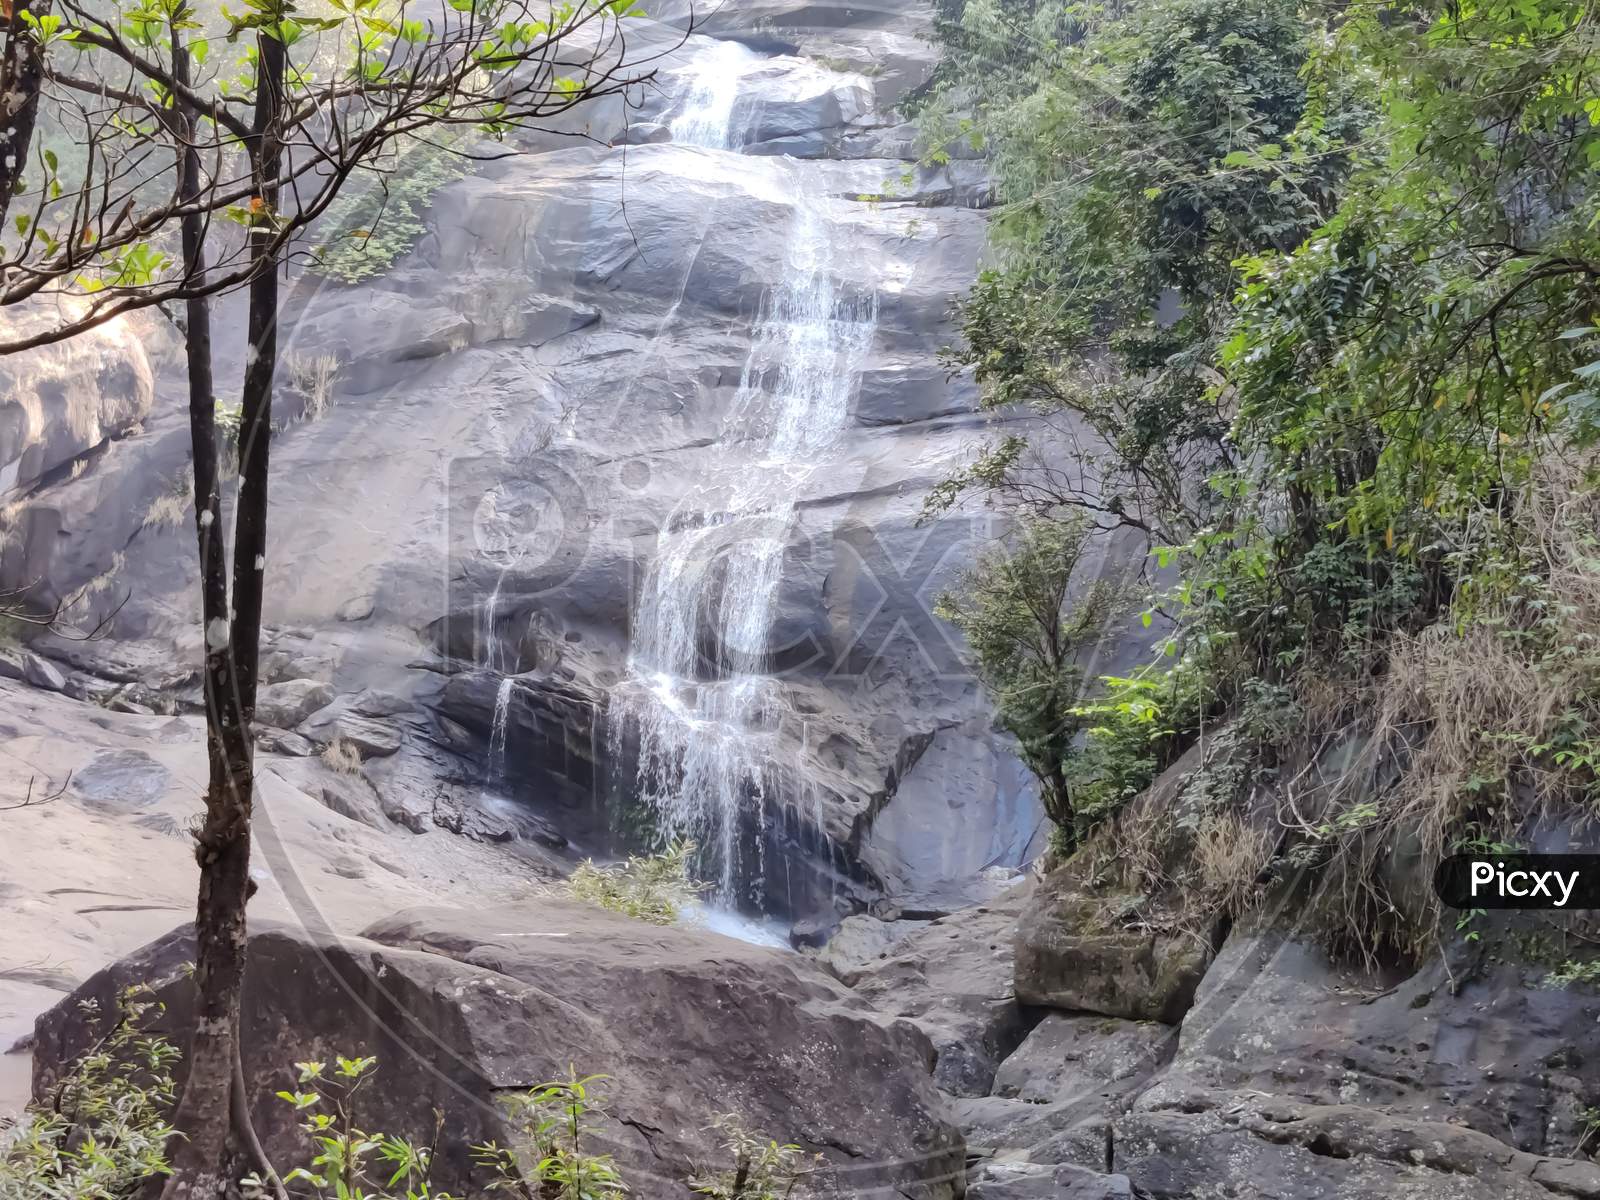 View Of Water Falls Over The Rocks In The Forest